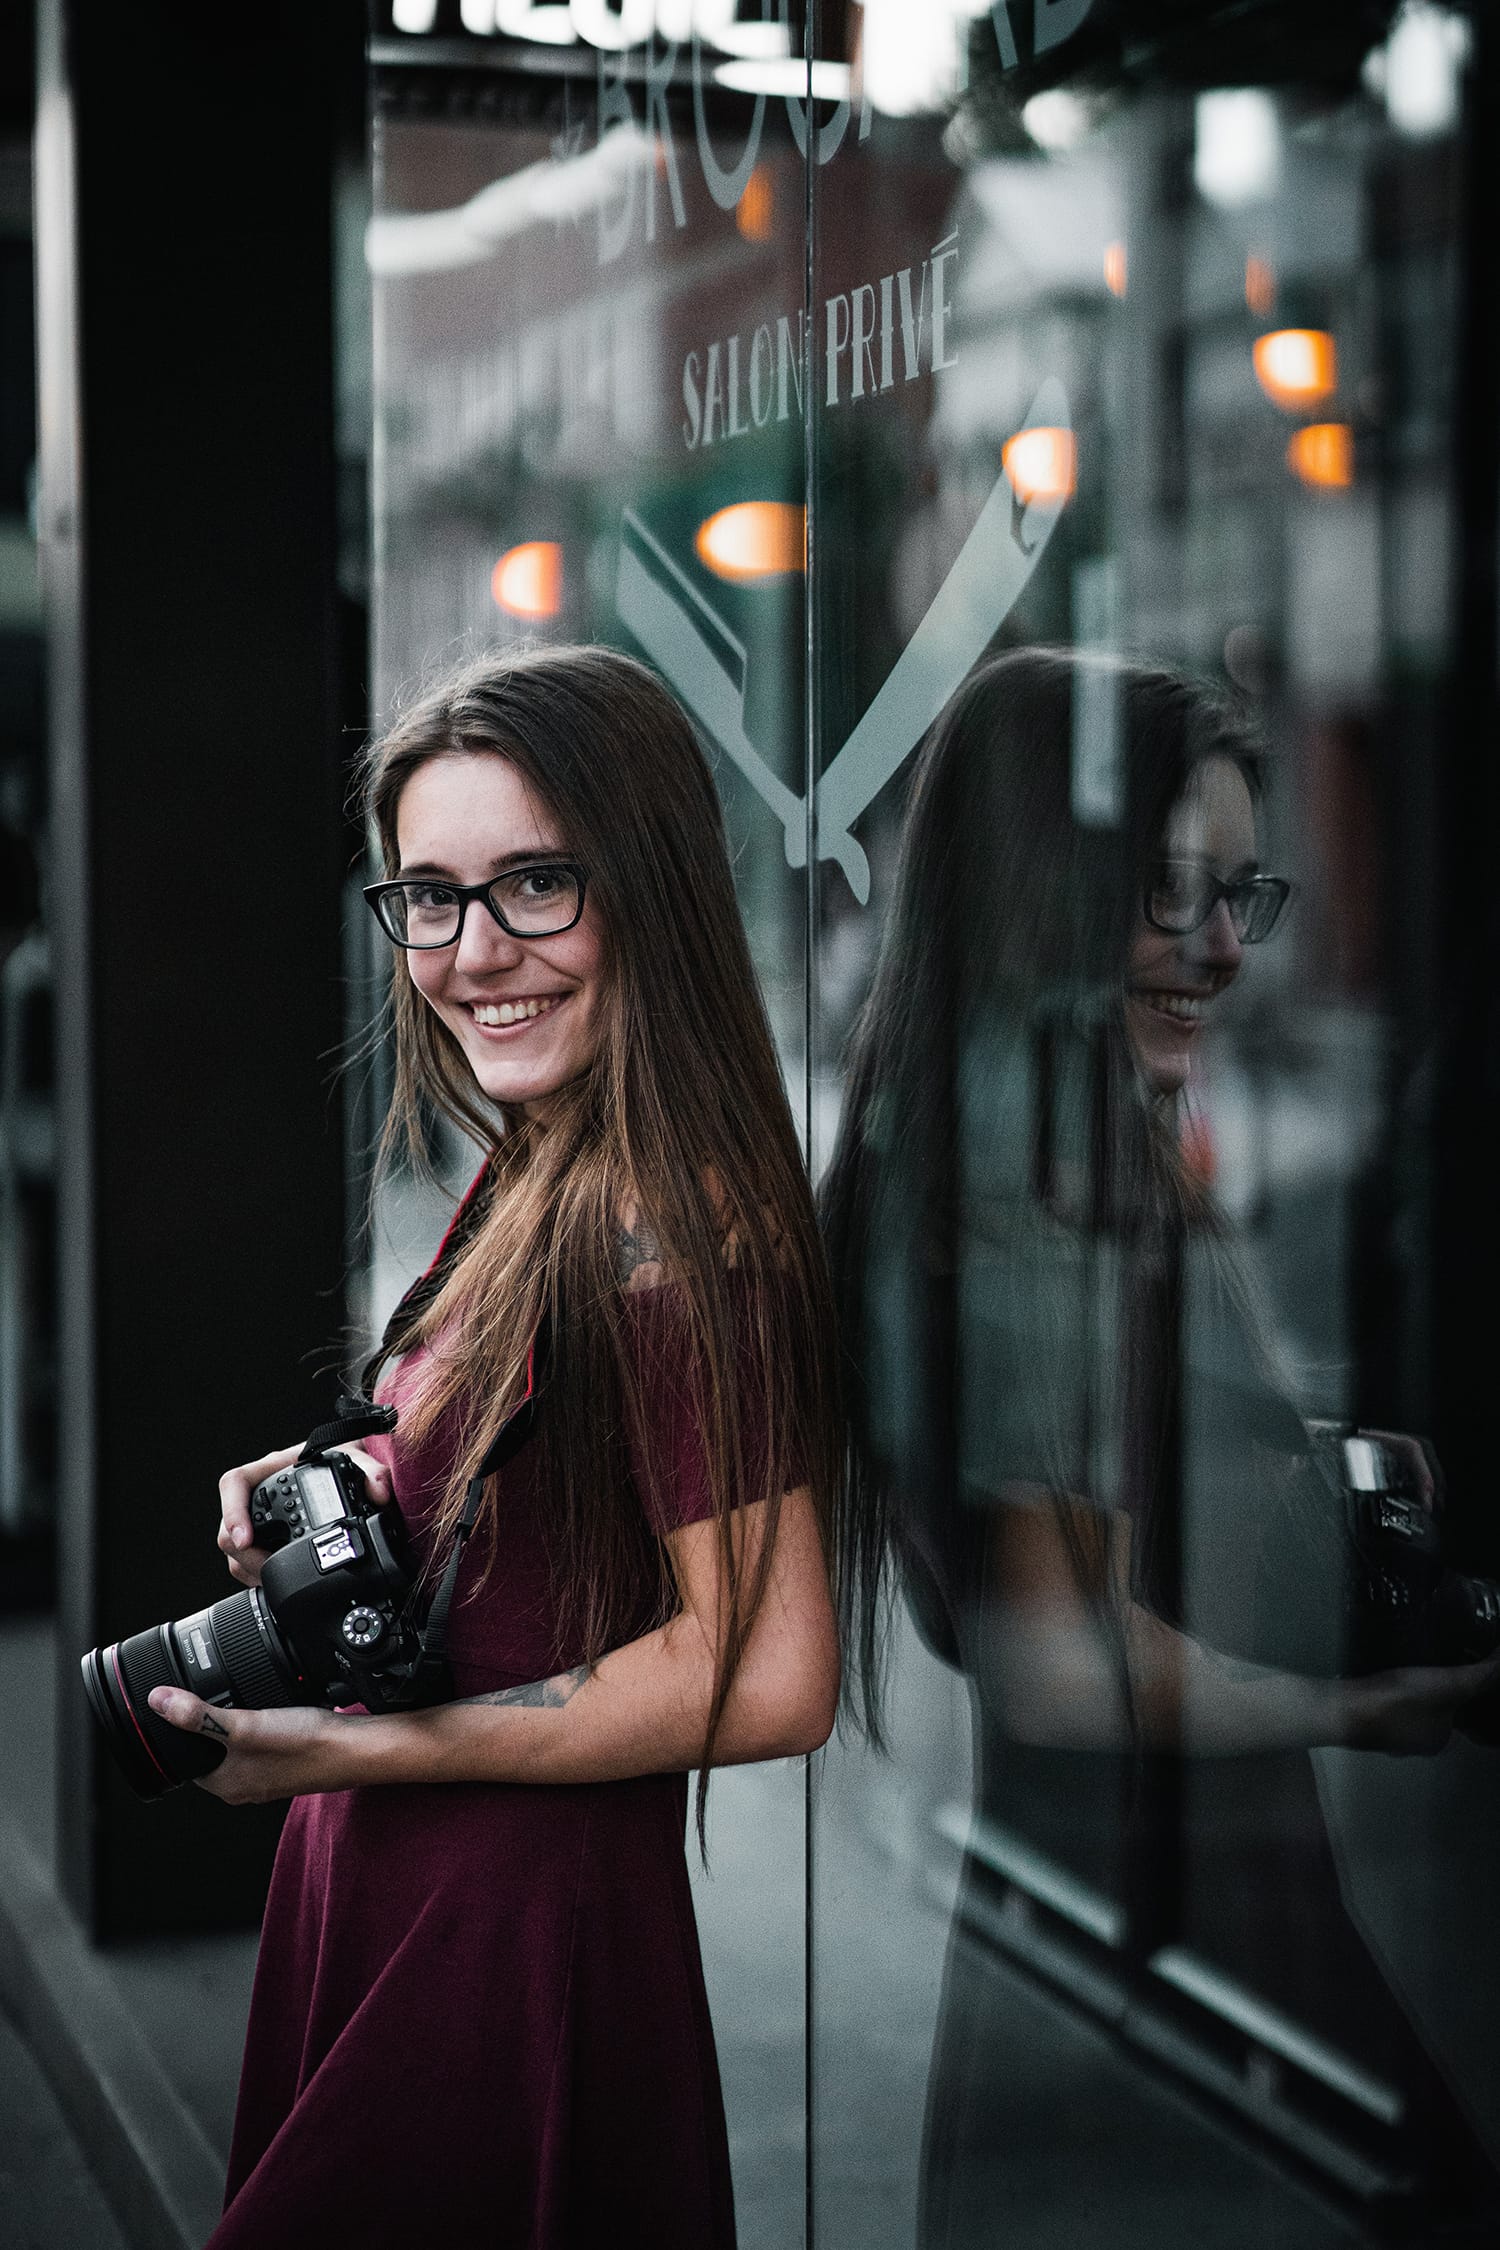 Street Photography: 18 Awesome Tips For Shooting Great Images in the City